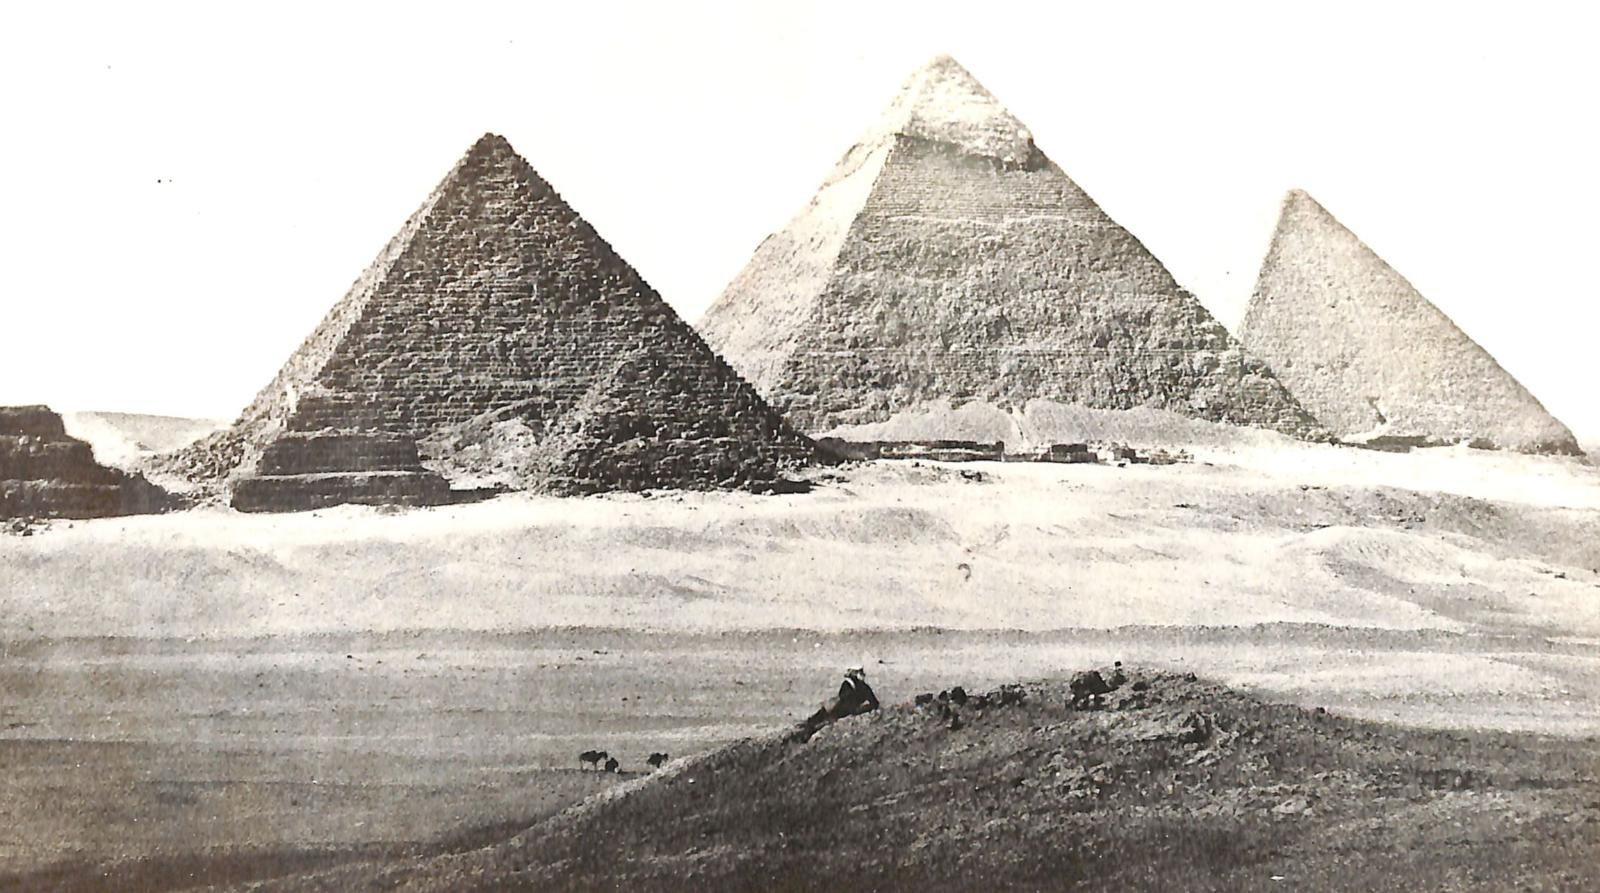 Black and white image with several pyramids of Giza in the background. A person lies on a hill overlooking the pyramids.